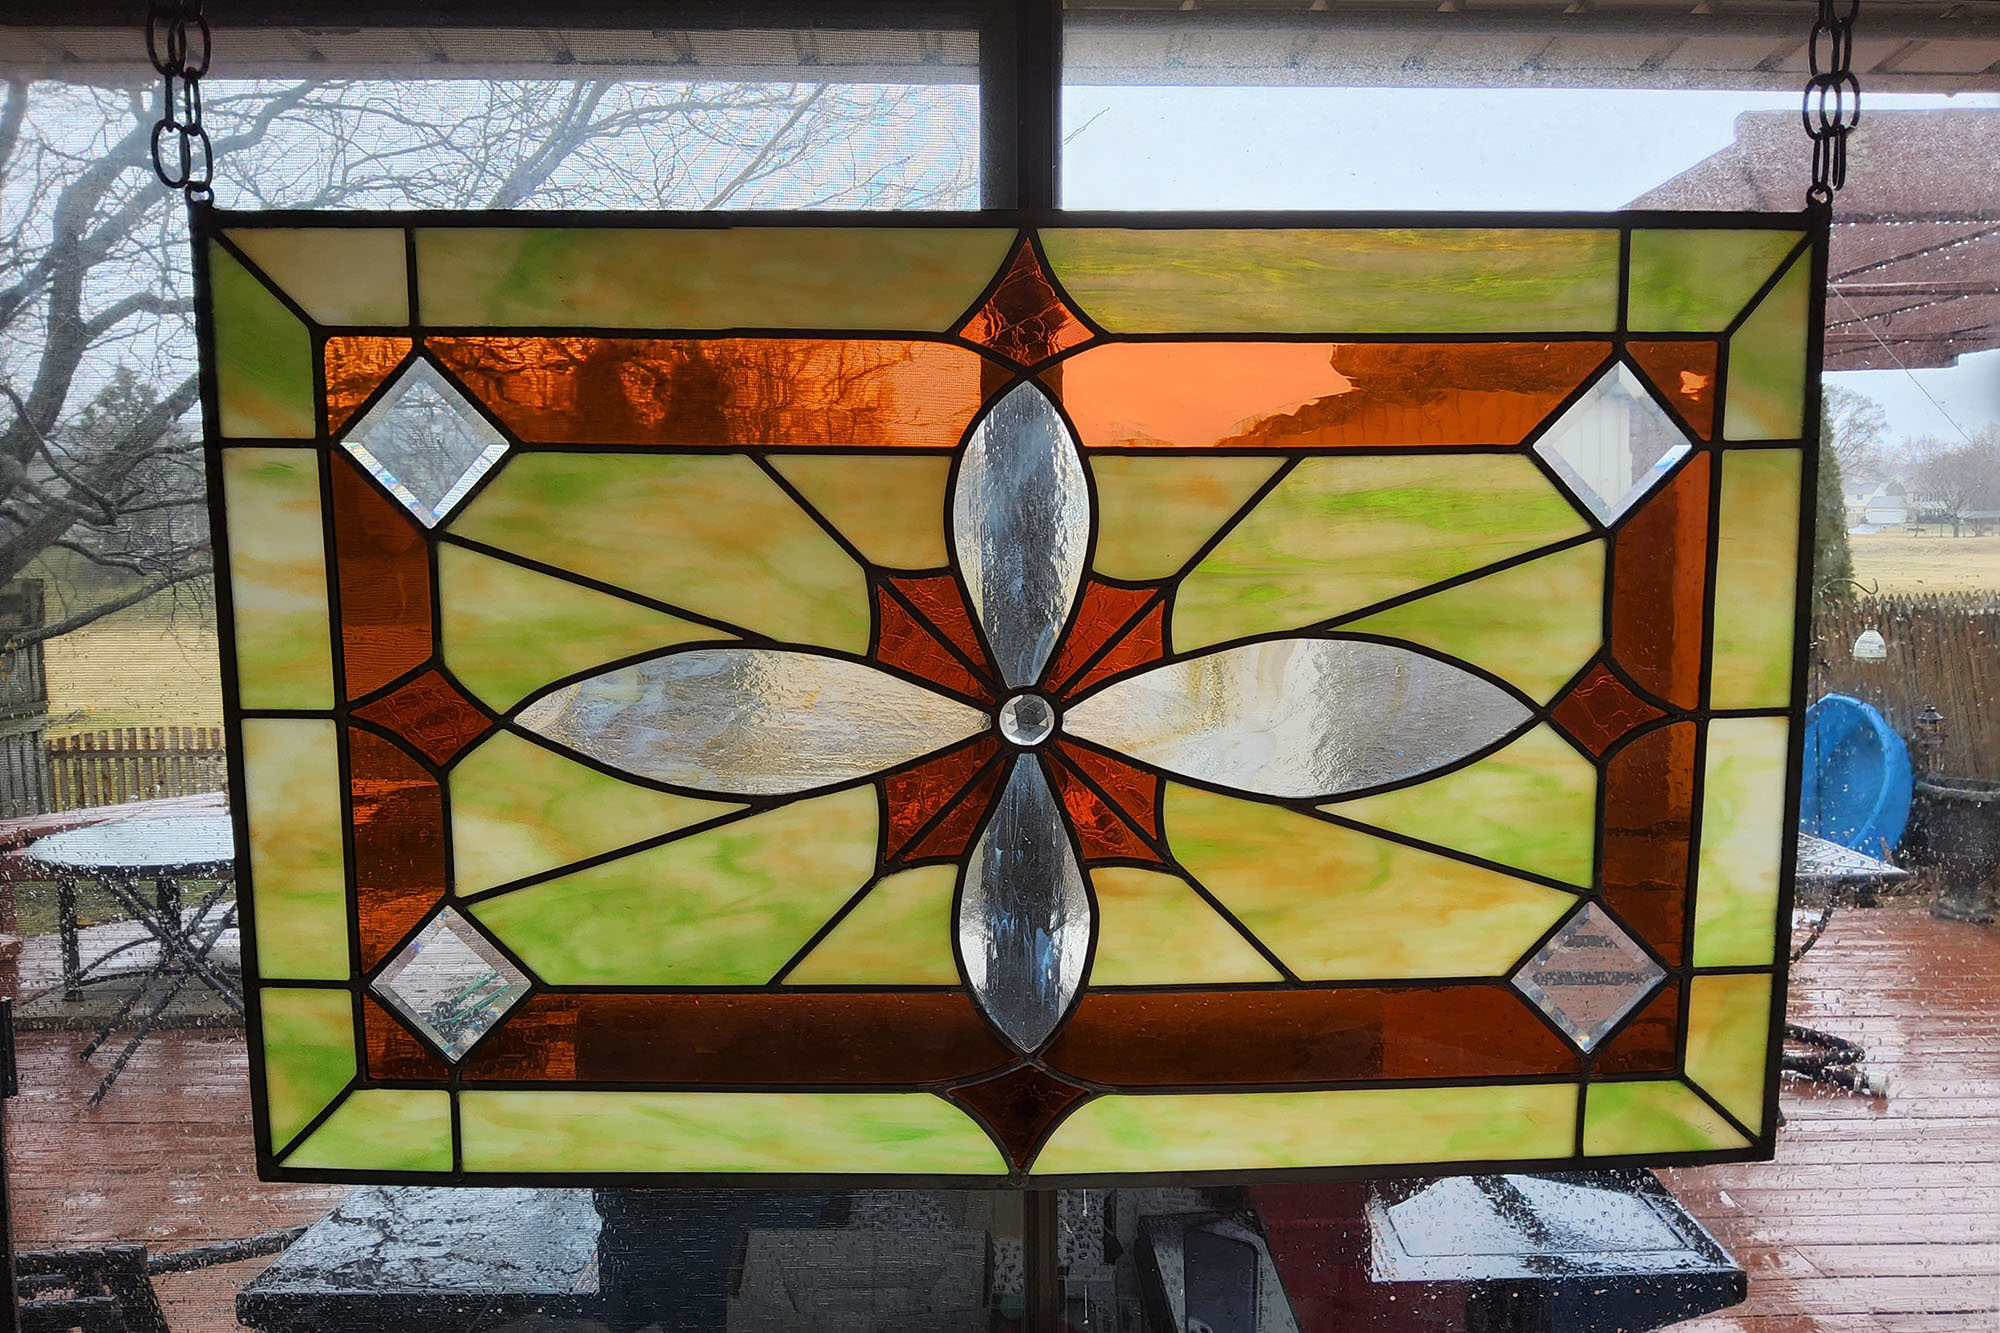 Samsung Galaxy Tab S8+ photo sample taken of a stained glass window.